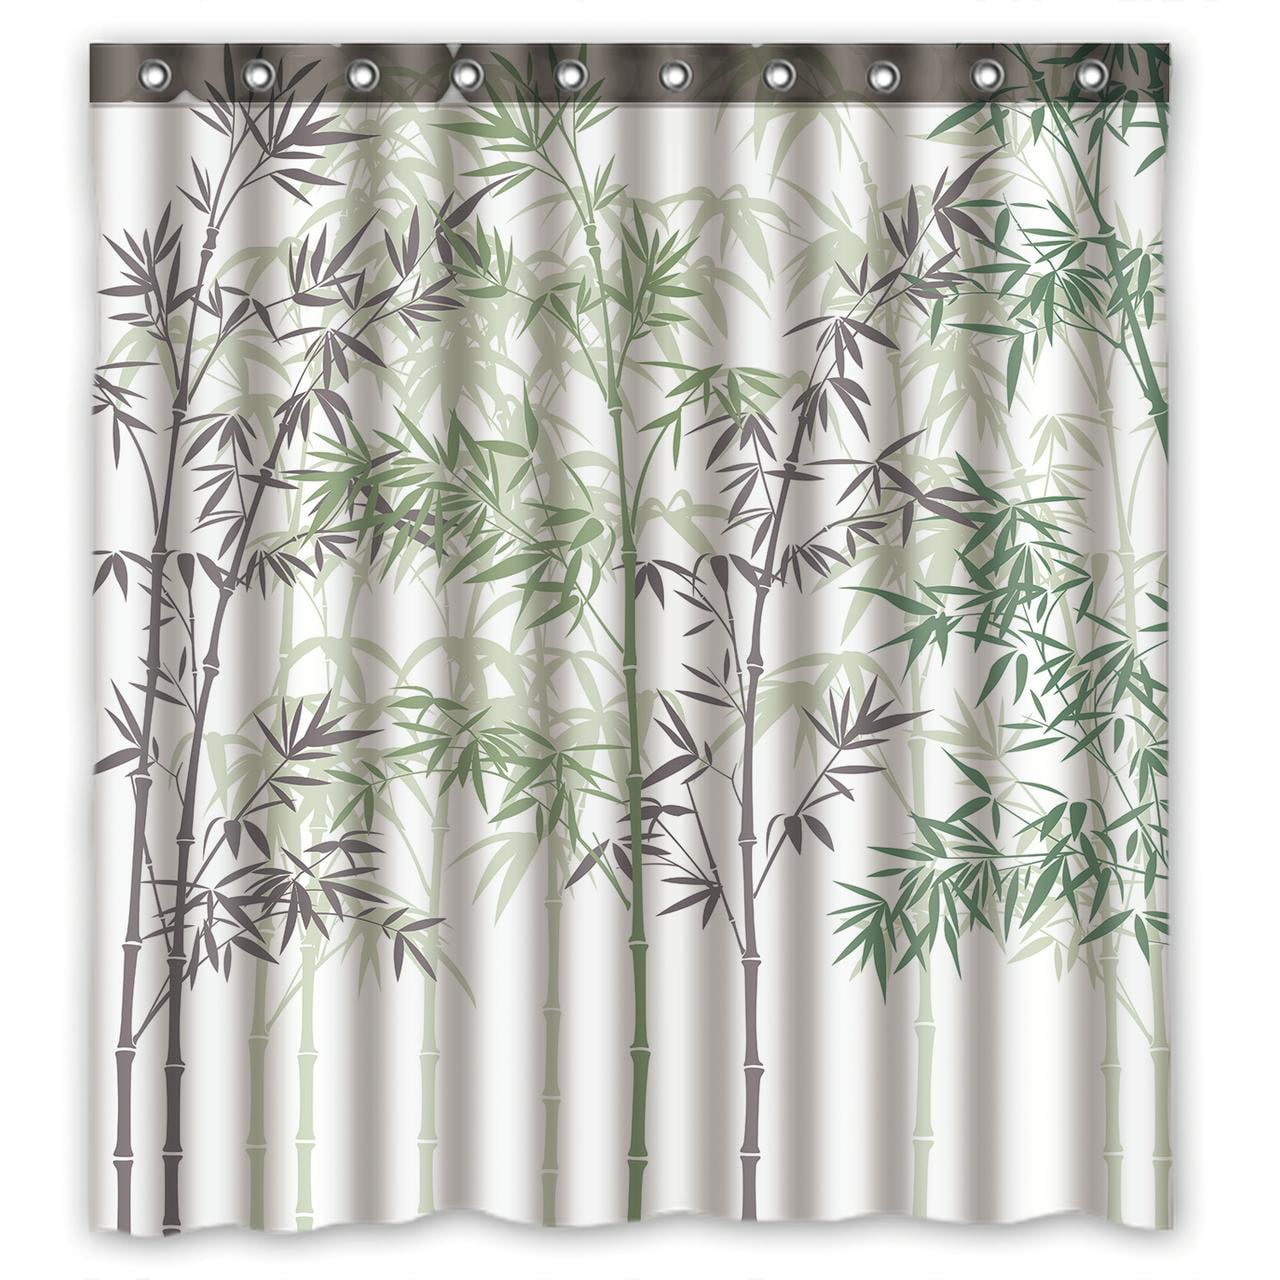 YKCG Forest Painting Bamboo Shower Curtain Waterproof Fabric Bathroom ...